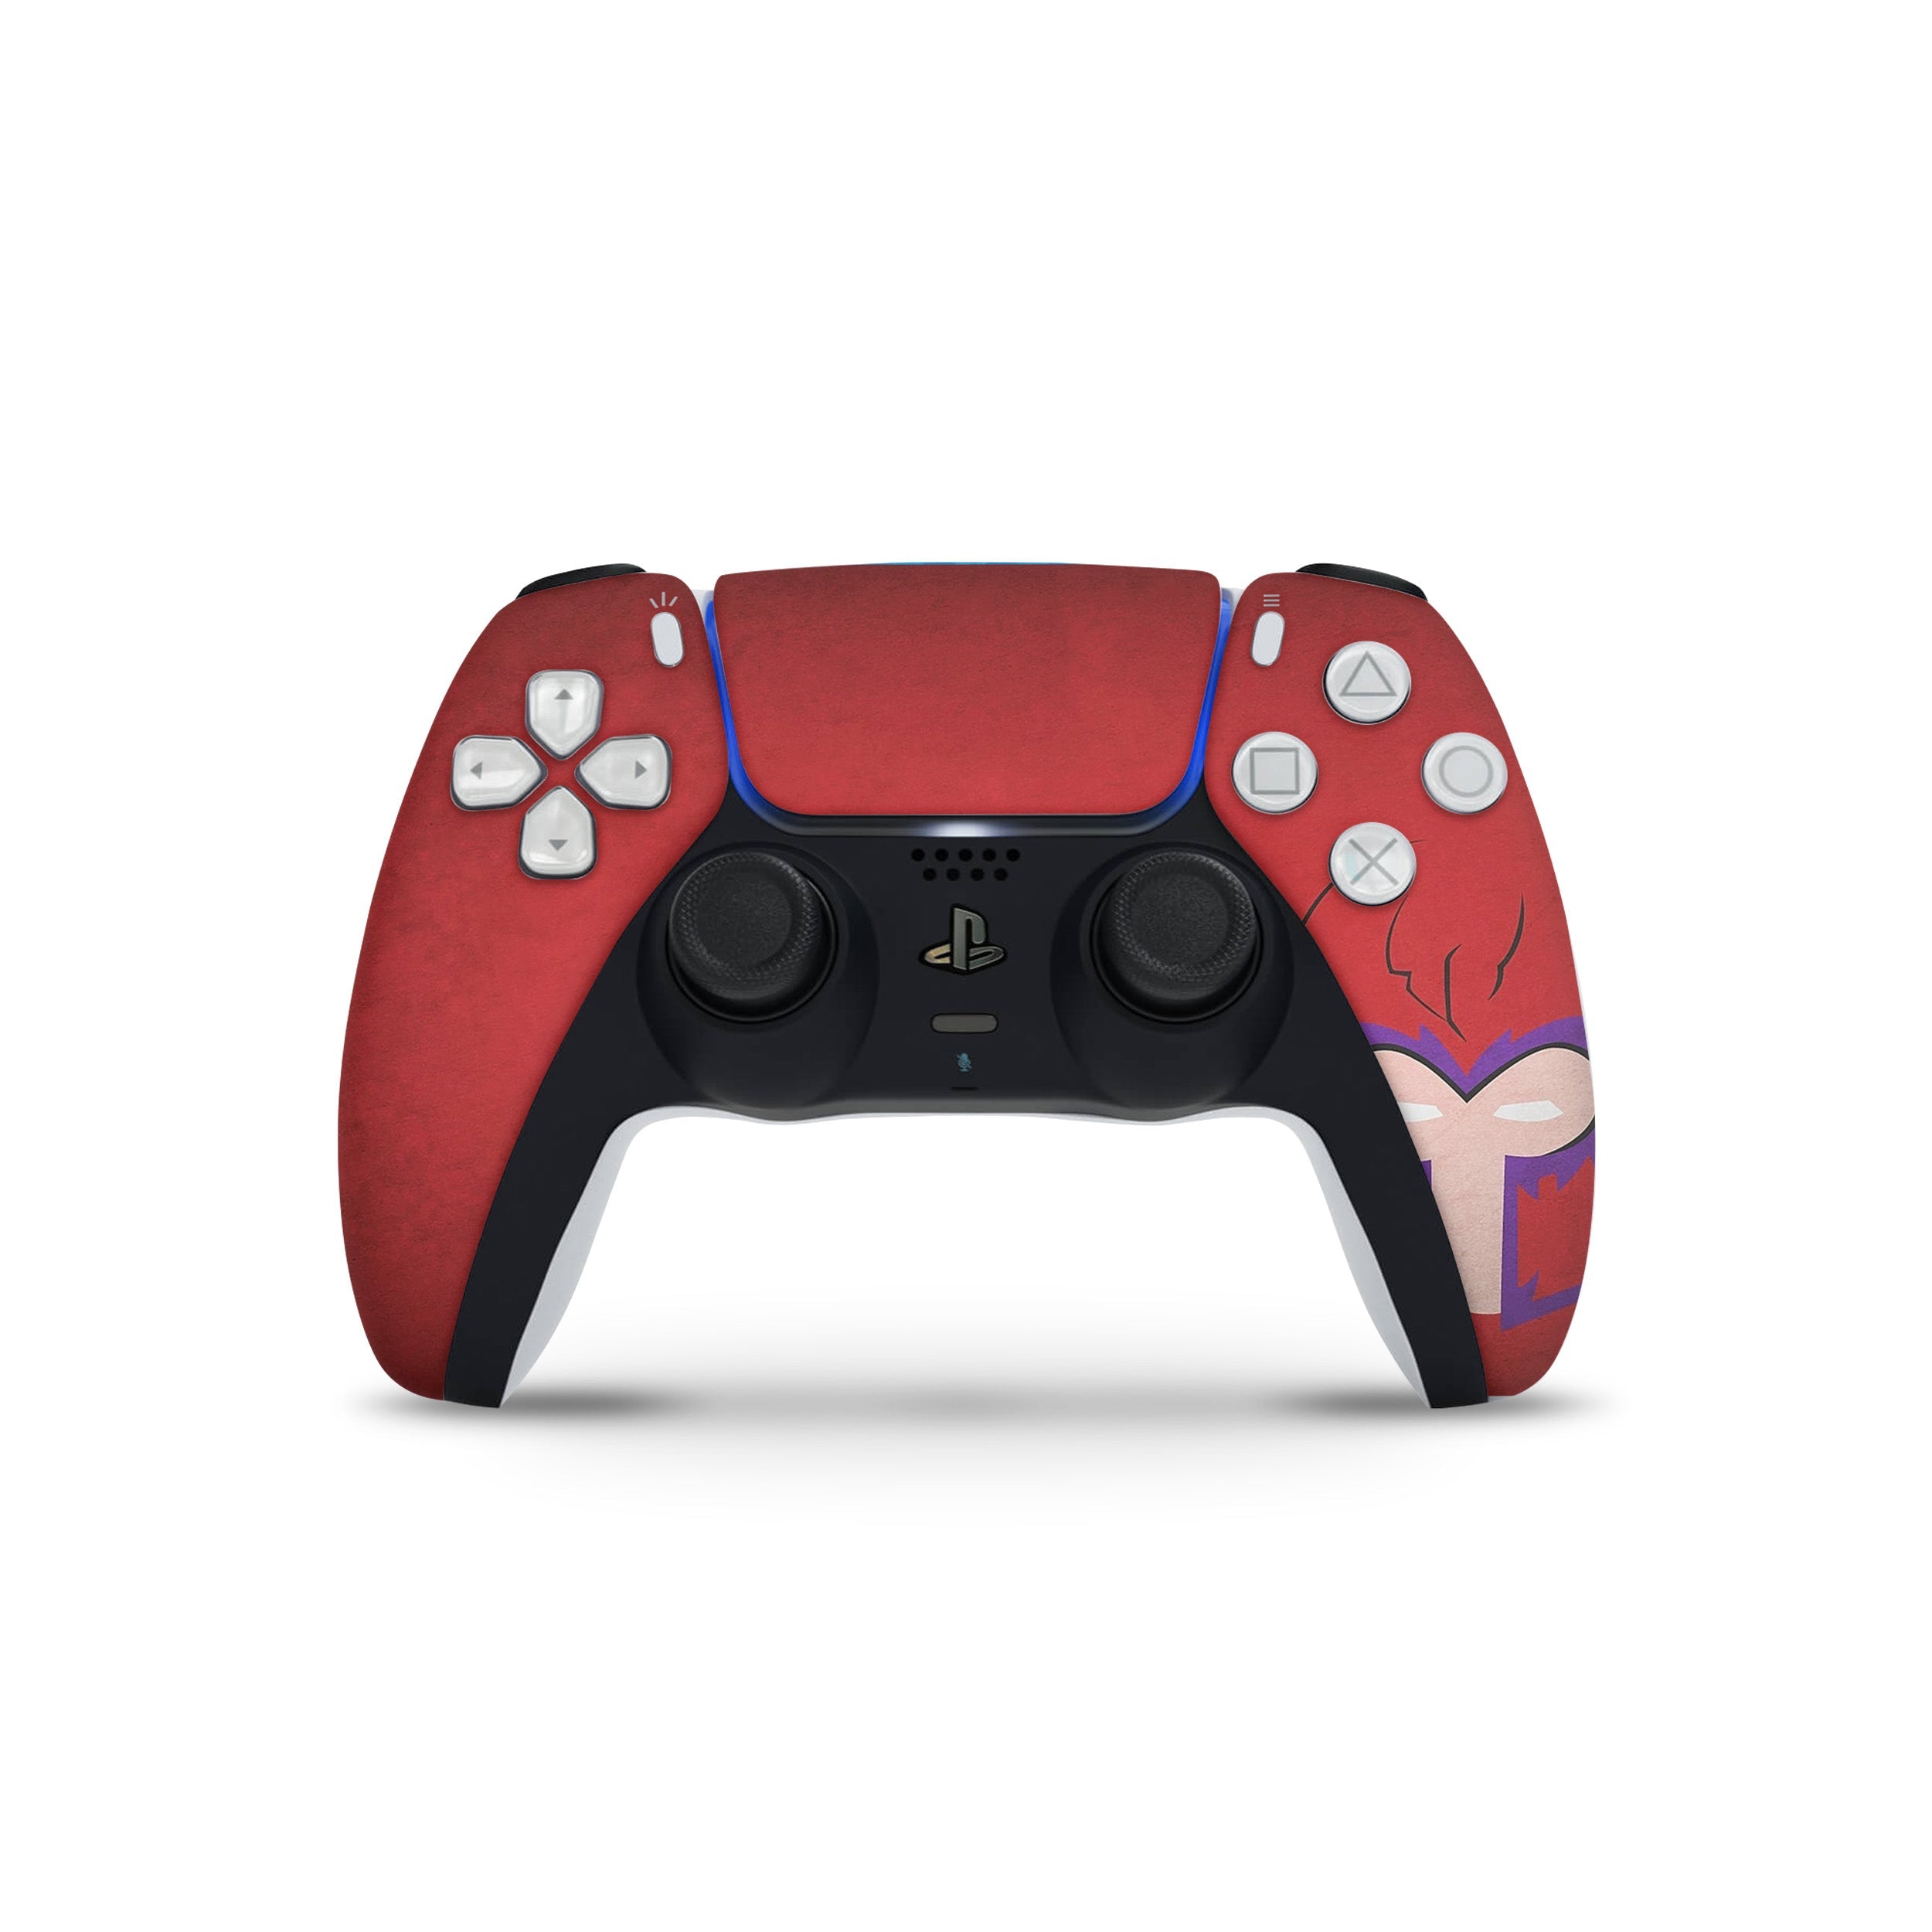 A video game skin featuring a Marvel X Men Magneto design for the PS5 DualSense Controller.